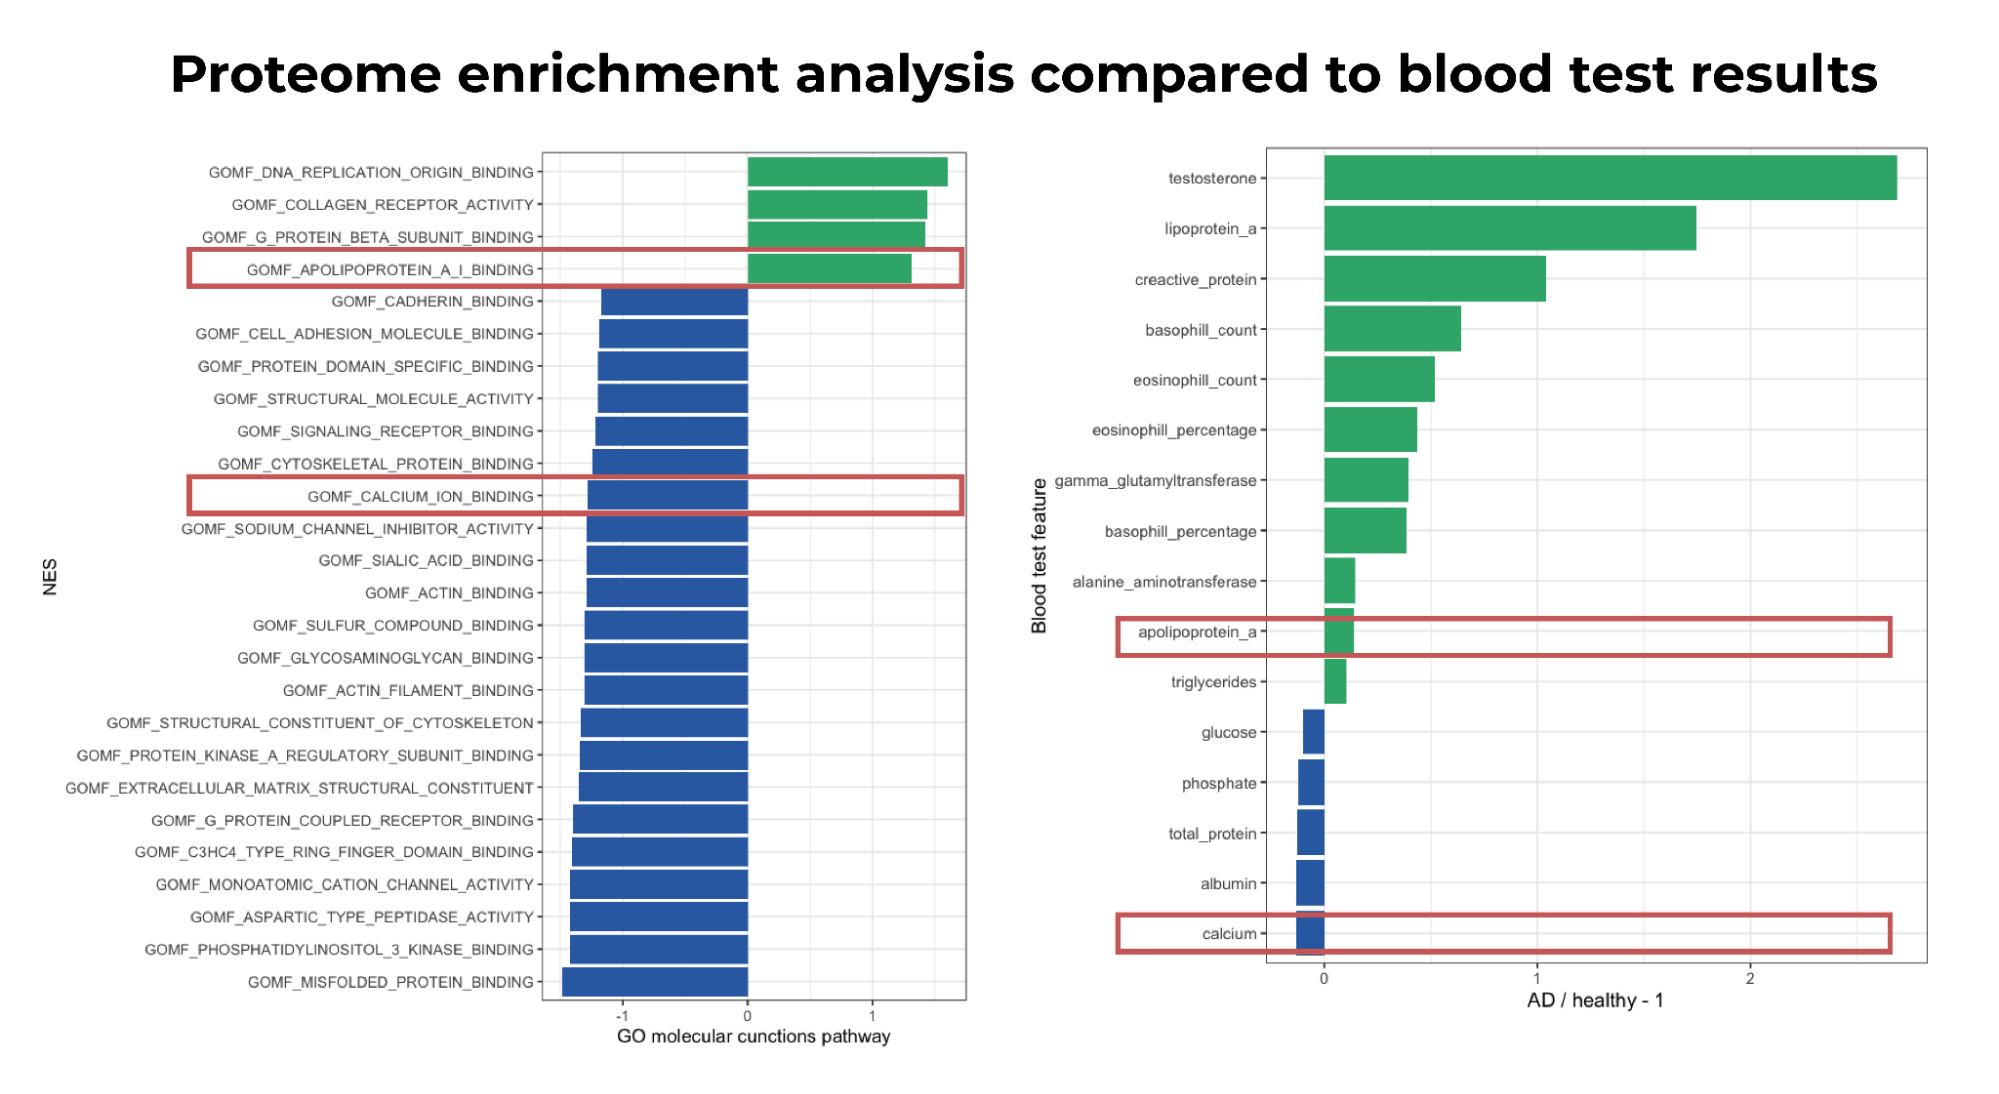 Figure 4. The barplots of Go molecular functions pathway in V8 state and blood samples of atopic dermatitis patients compared to healthy individuals. Highlighted are features that show similar patterns